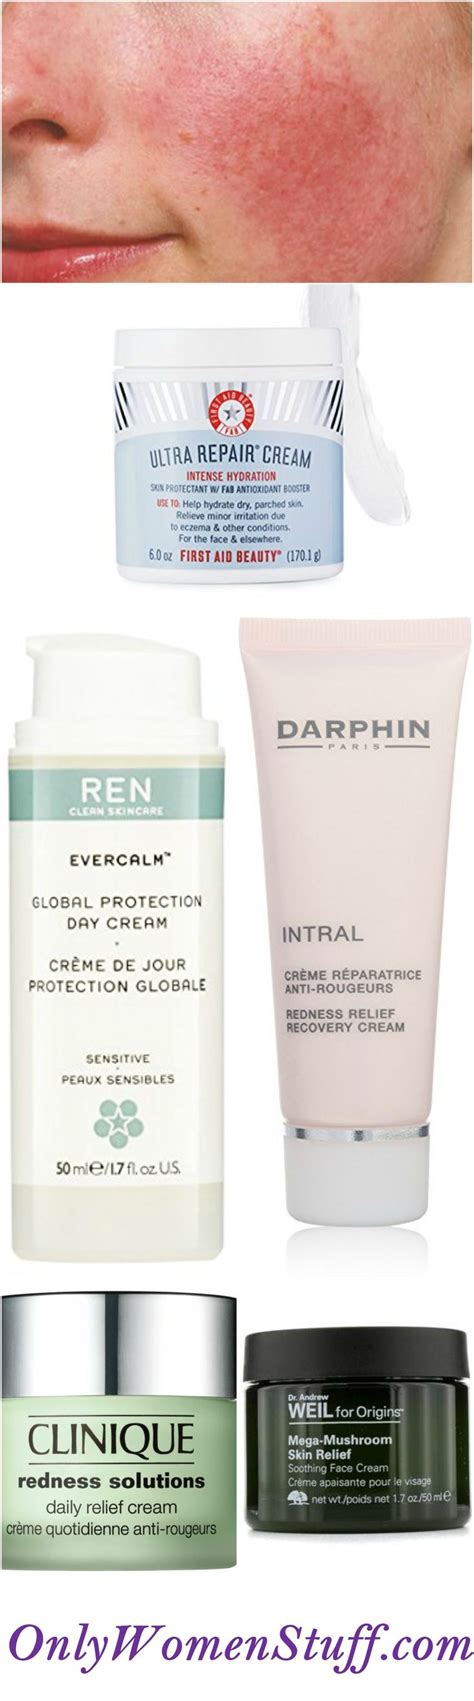 10 Best Anti Redness Cream Products With Reviews Anti Redness